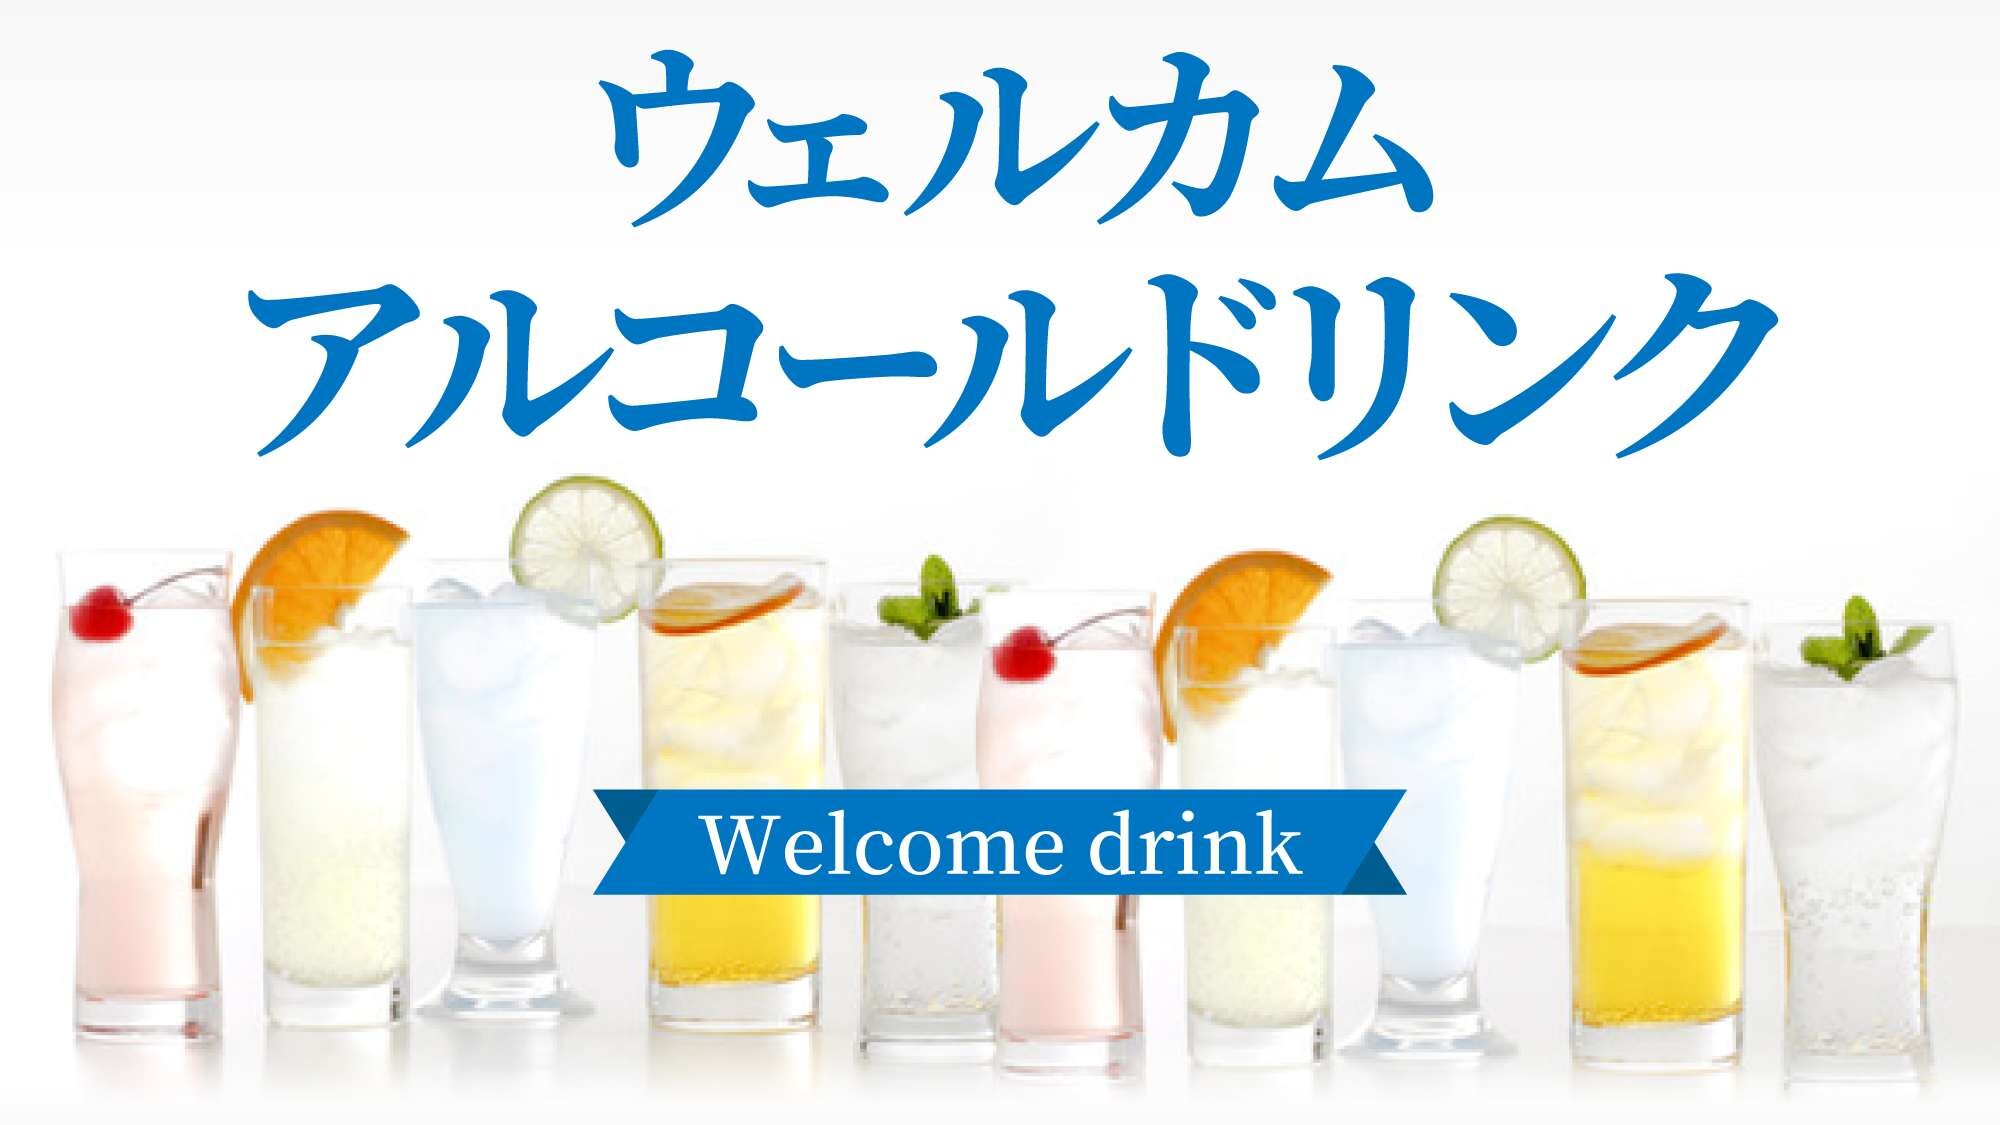 Welcome drink